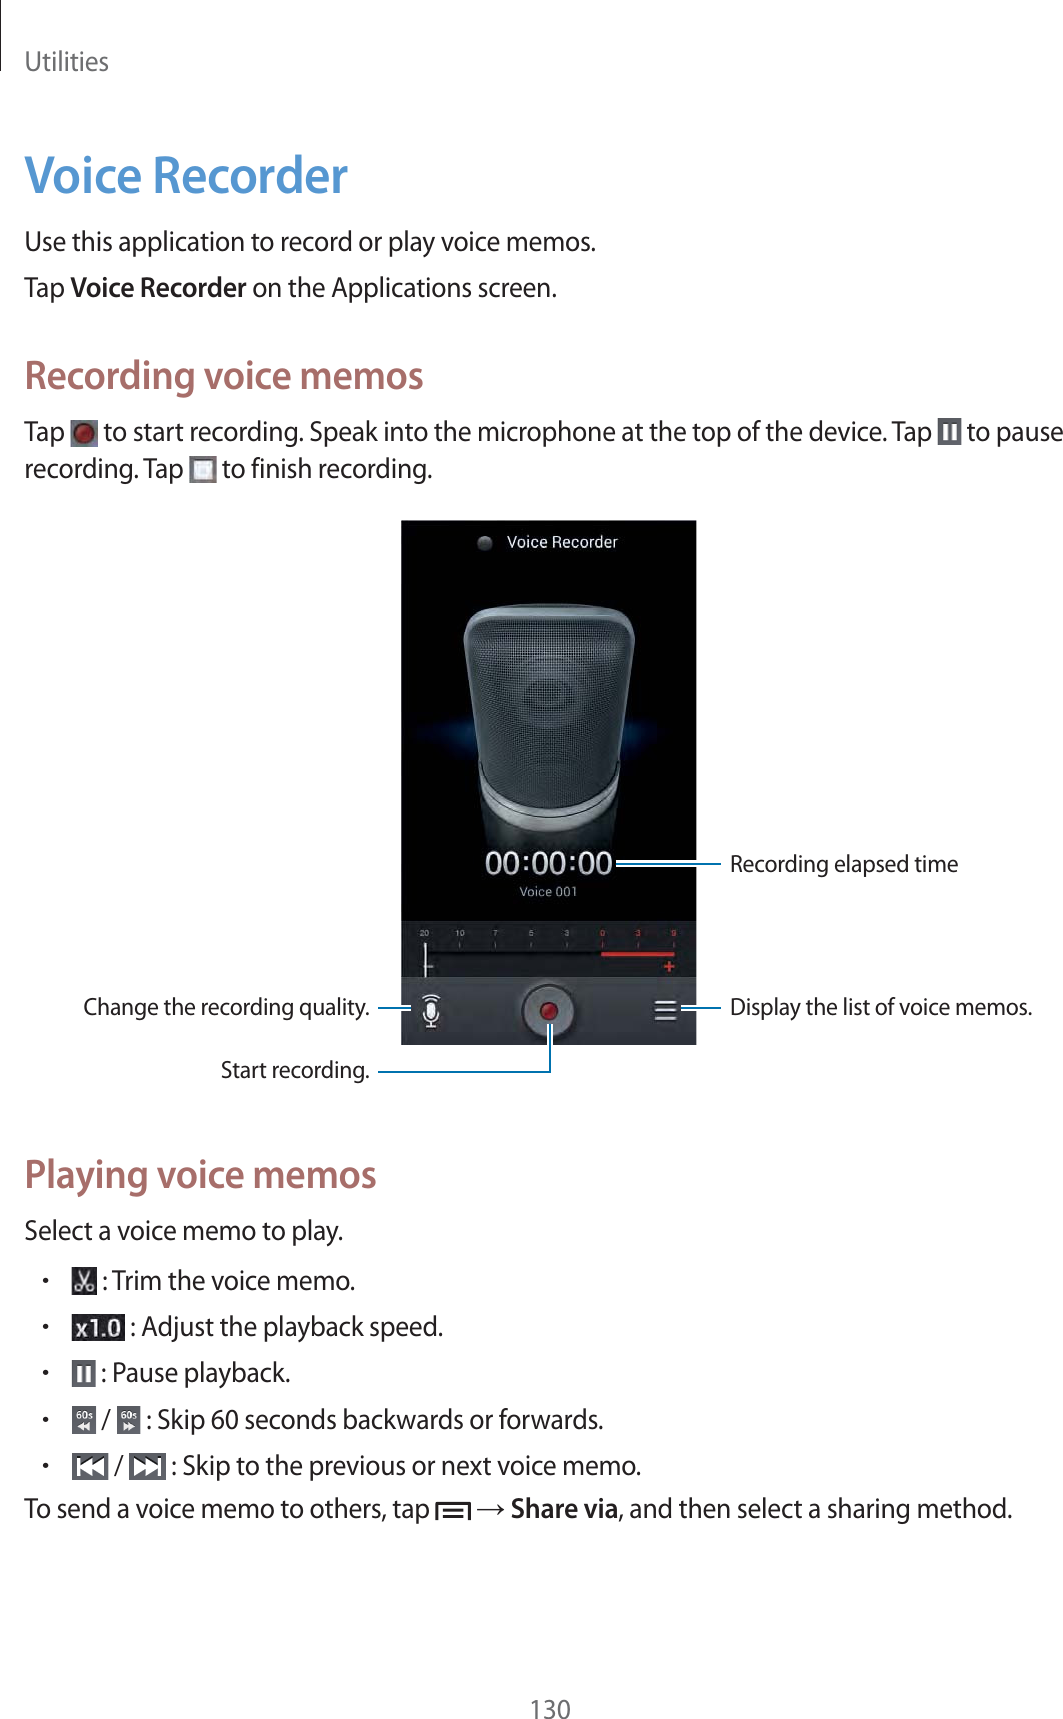 Utilities130Voice RecorderUse this application to record or play voice memos.Tap Voice Recorder on the Applications screen.Recording voice memosTap   to start recording. Speak into the microphone at the top of the device. Tap   to pause recording. Tap   to finish recording.Change the recording quality.Recording elapsed timeDisplay the list of voice memos.Start recording.Playing voice memosSelect a voice memo to play.r : Trim the voice memo.r : Adjust the playback speed.r : Pause playback.r /   : Skip 60 seconds backwards or forwards.r /   : Skip to the previous or next voice memo.To send a voice memo to others, tap    Share via, and then select a sharing method.